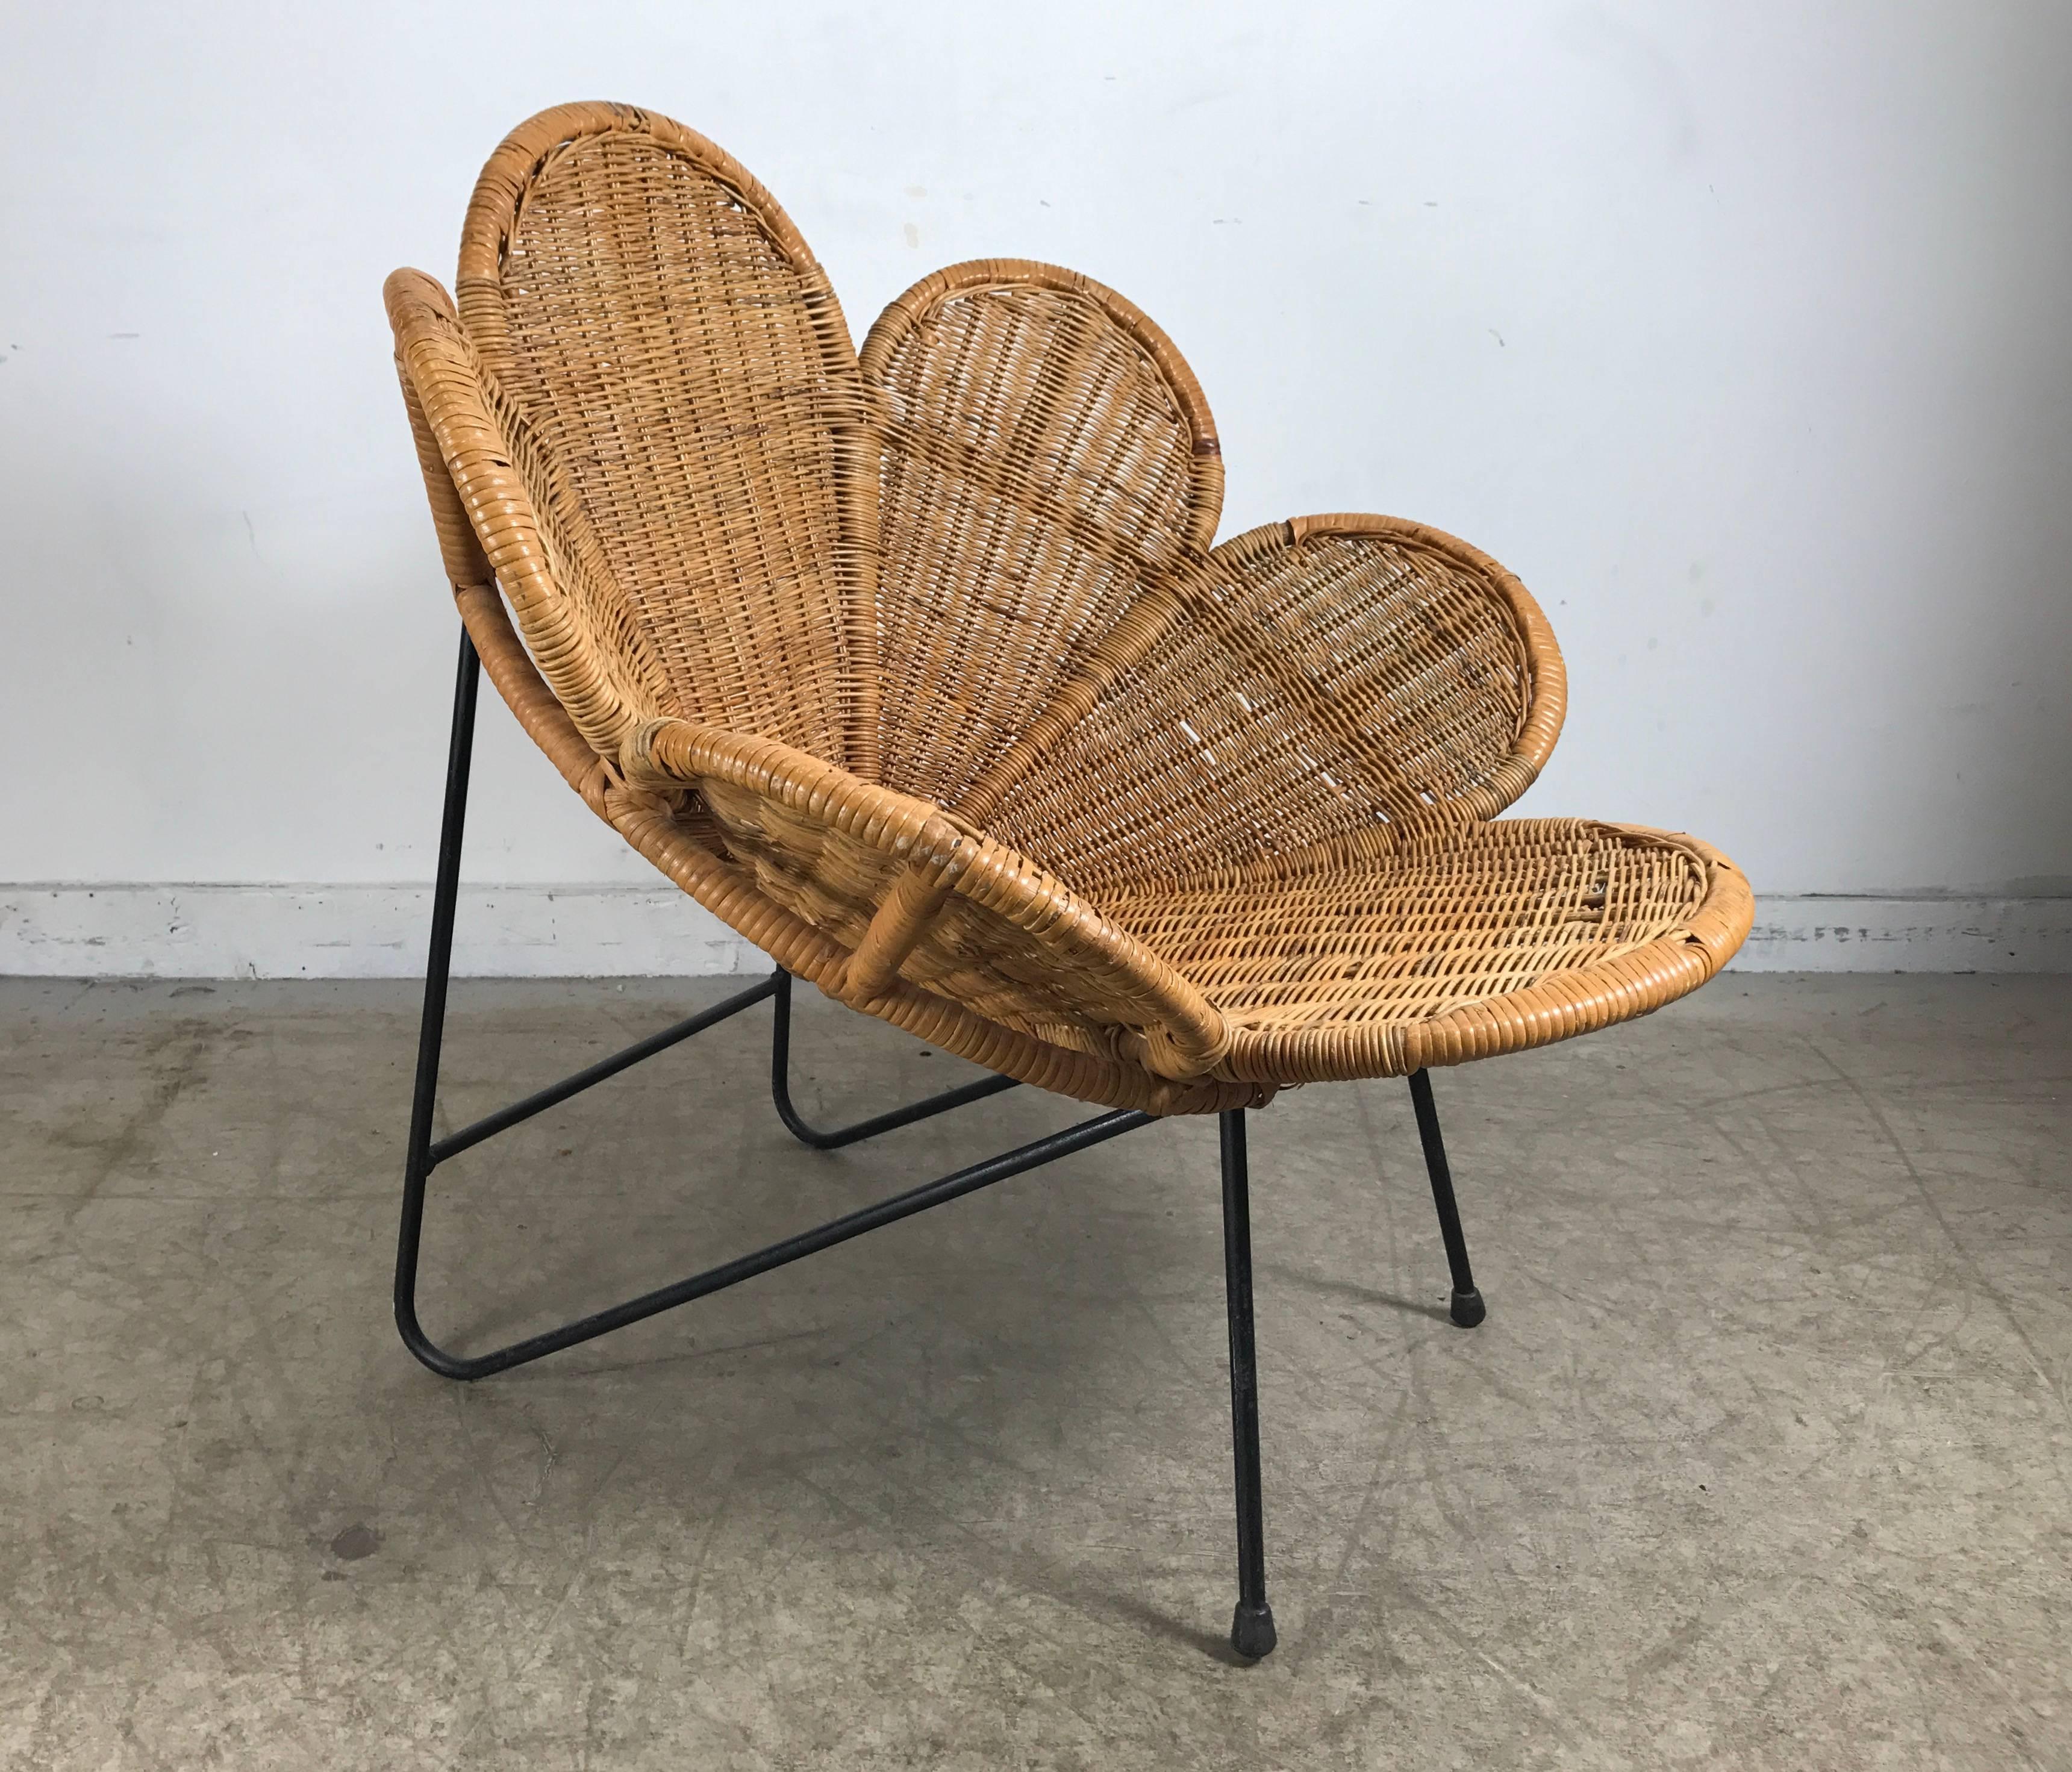 Unusual modernist wicker and iron Lotus chair. Nice quality, heavy iron base, wicker and bamboo top.